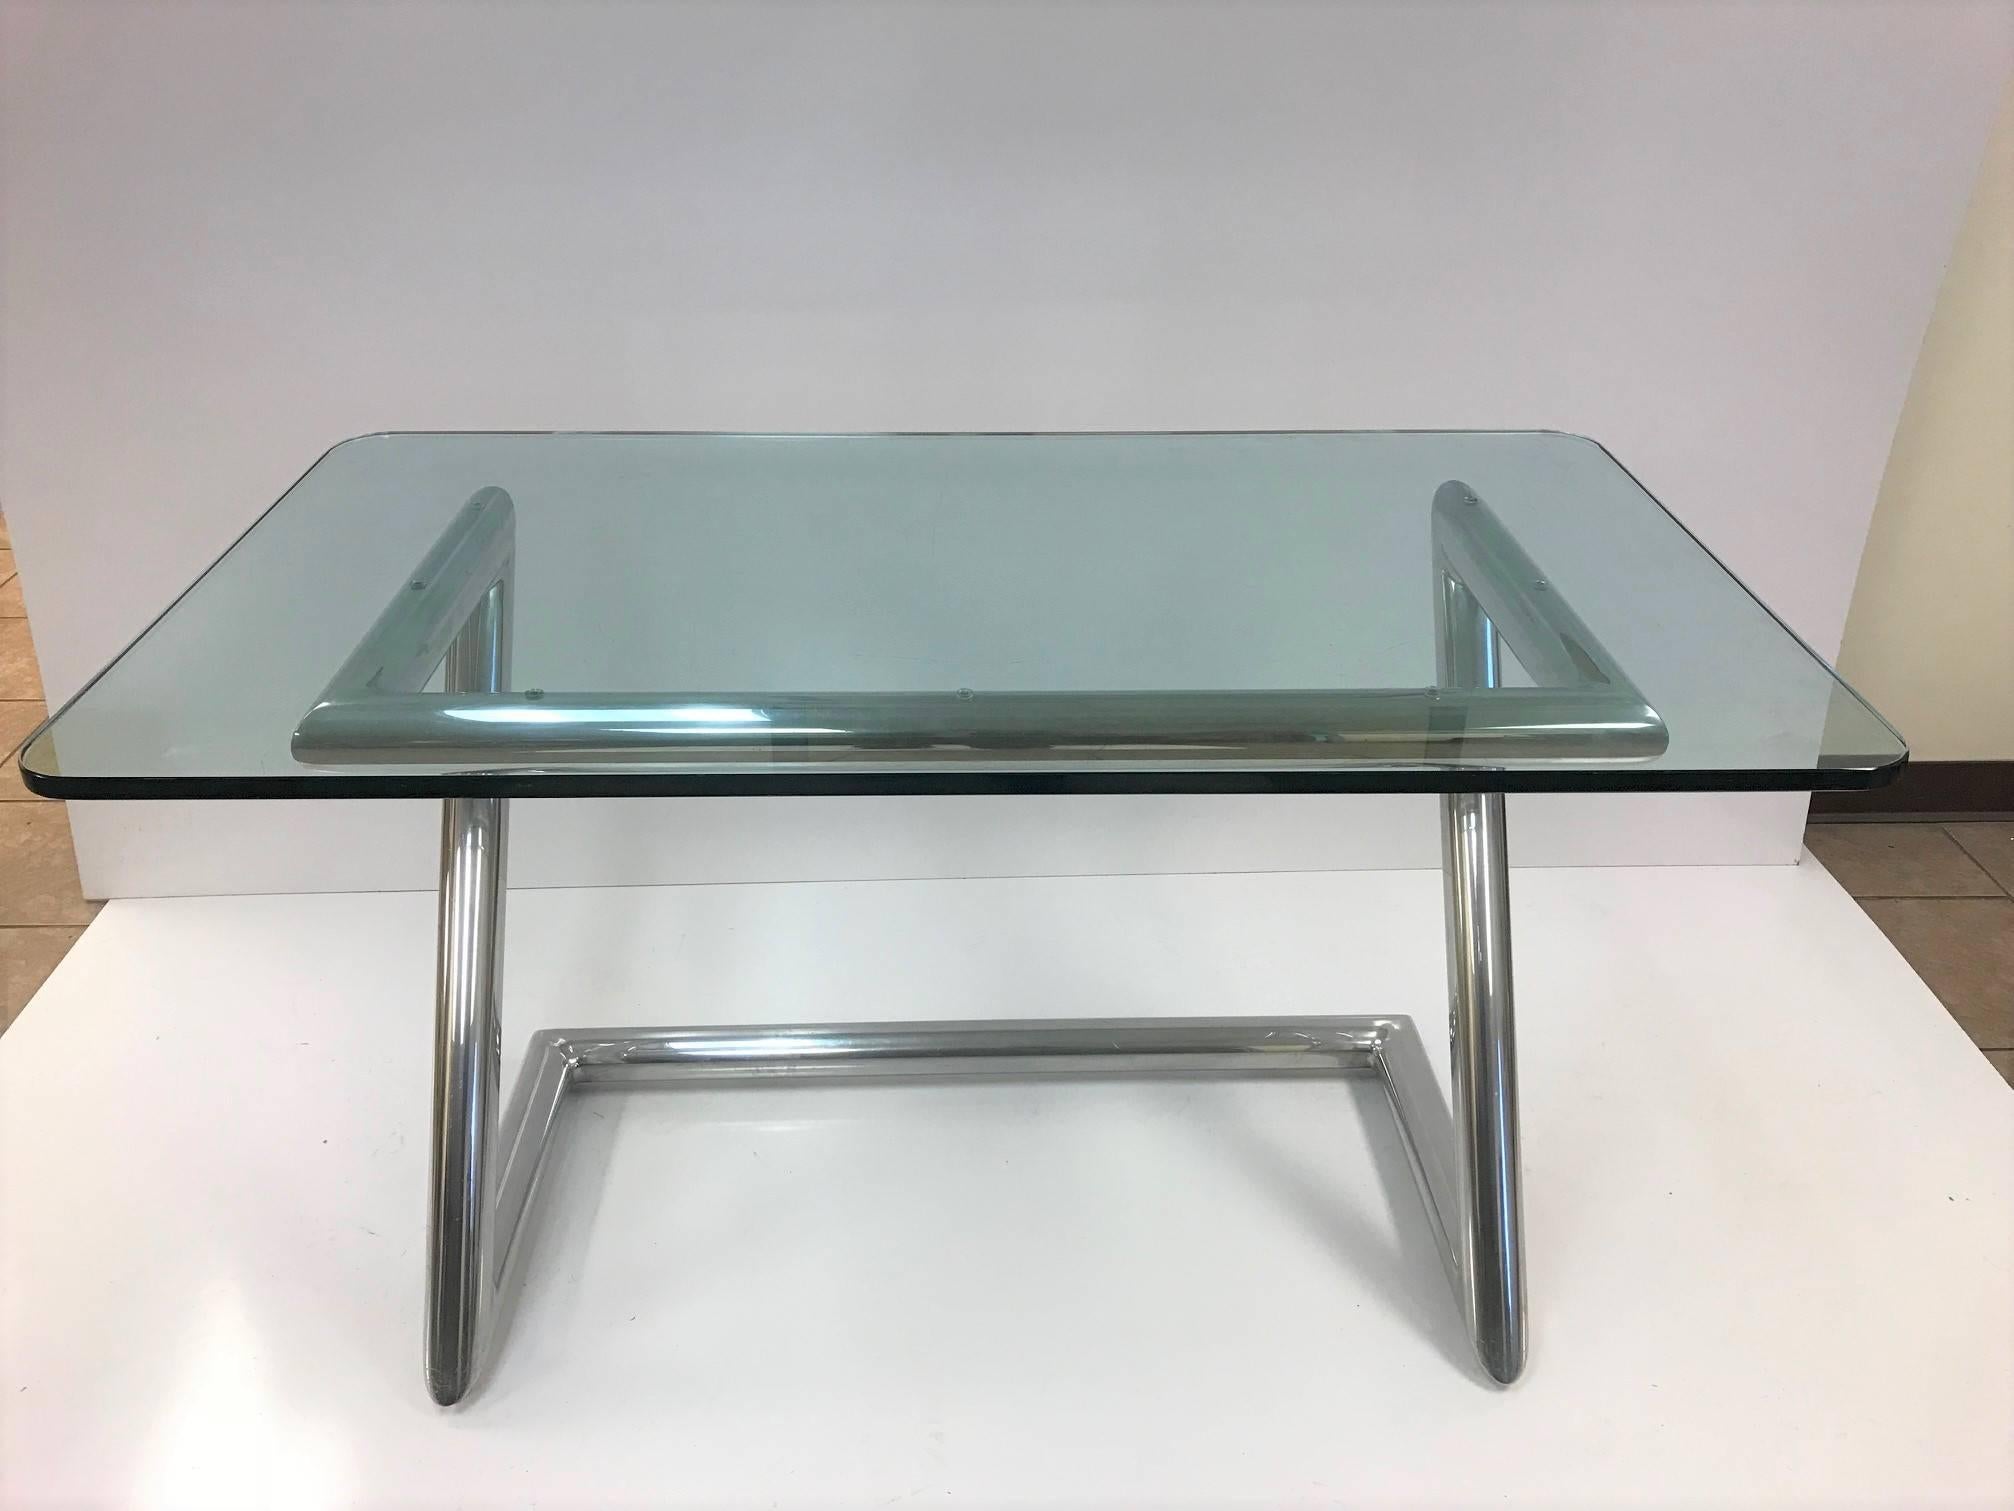 John Mascheroni polished aluminum and glass desk. Desk has a tubular frame with a 1/2 inch thick glass top.